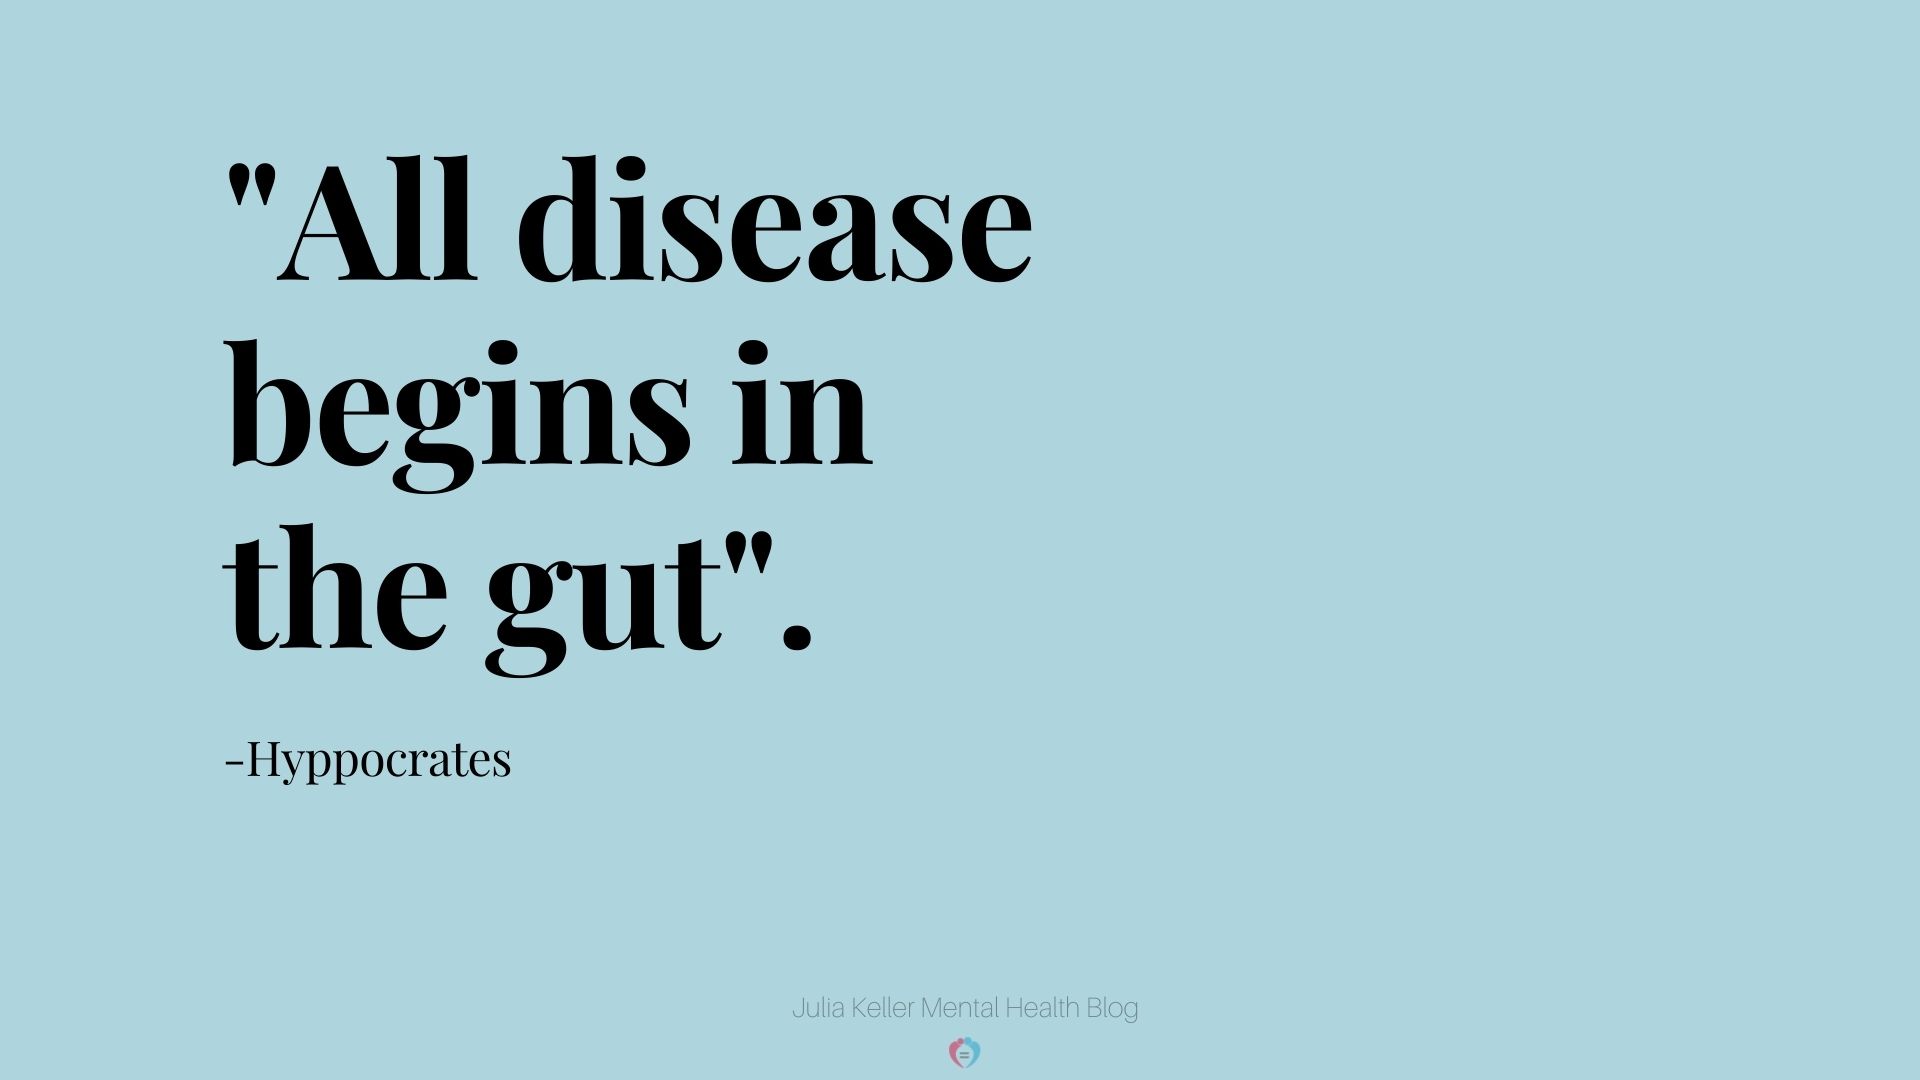 All disease begins in the gut. -Hypocrates